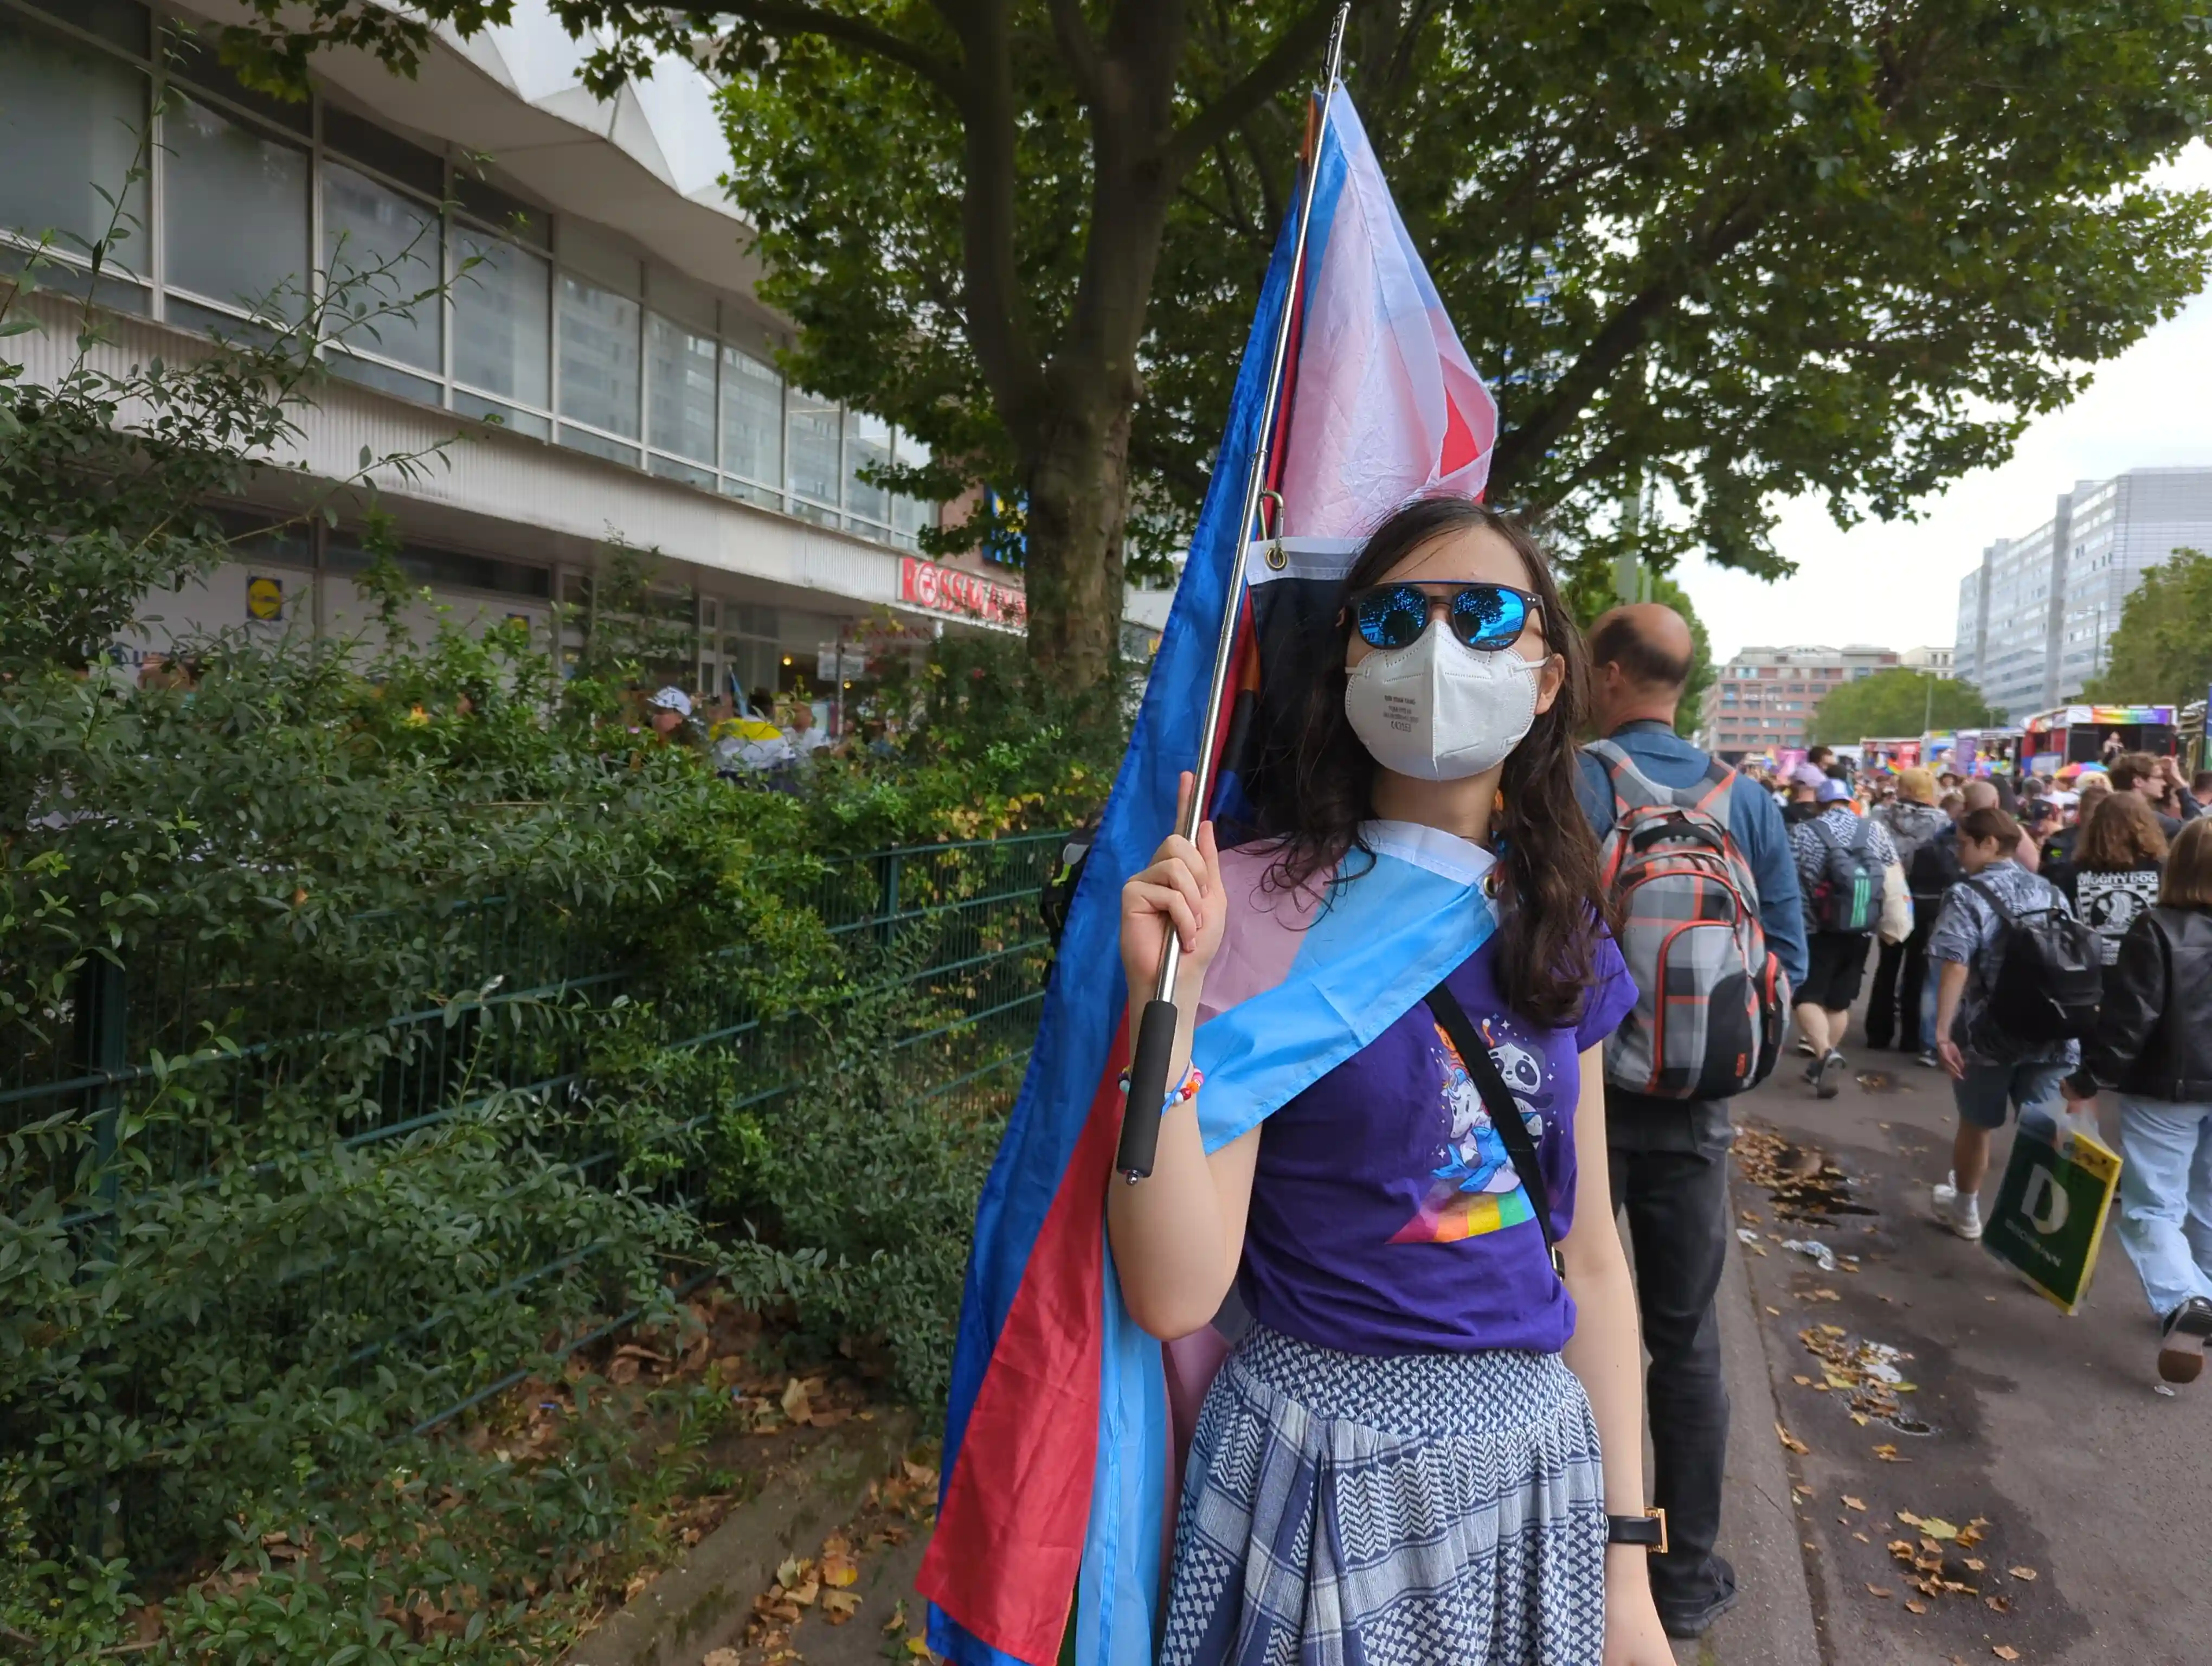 Artemis at CSD, holding a pride flag and wearing one as a cape